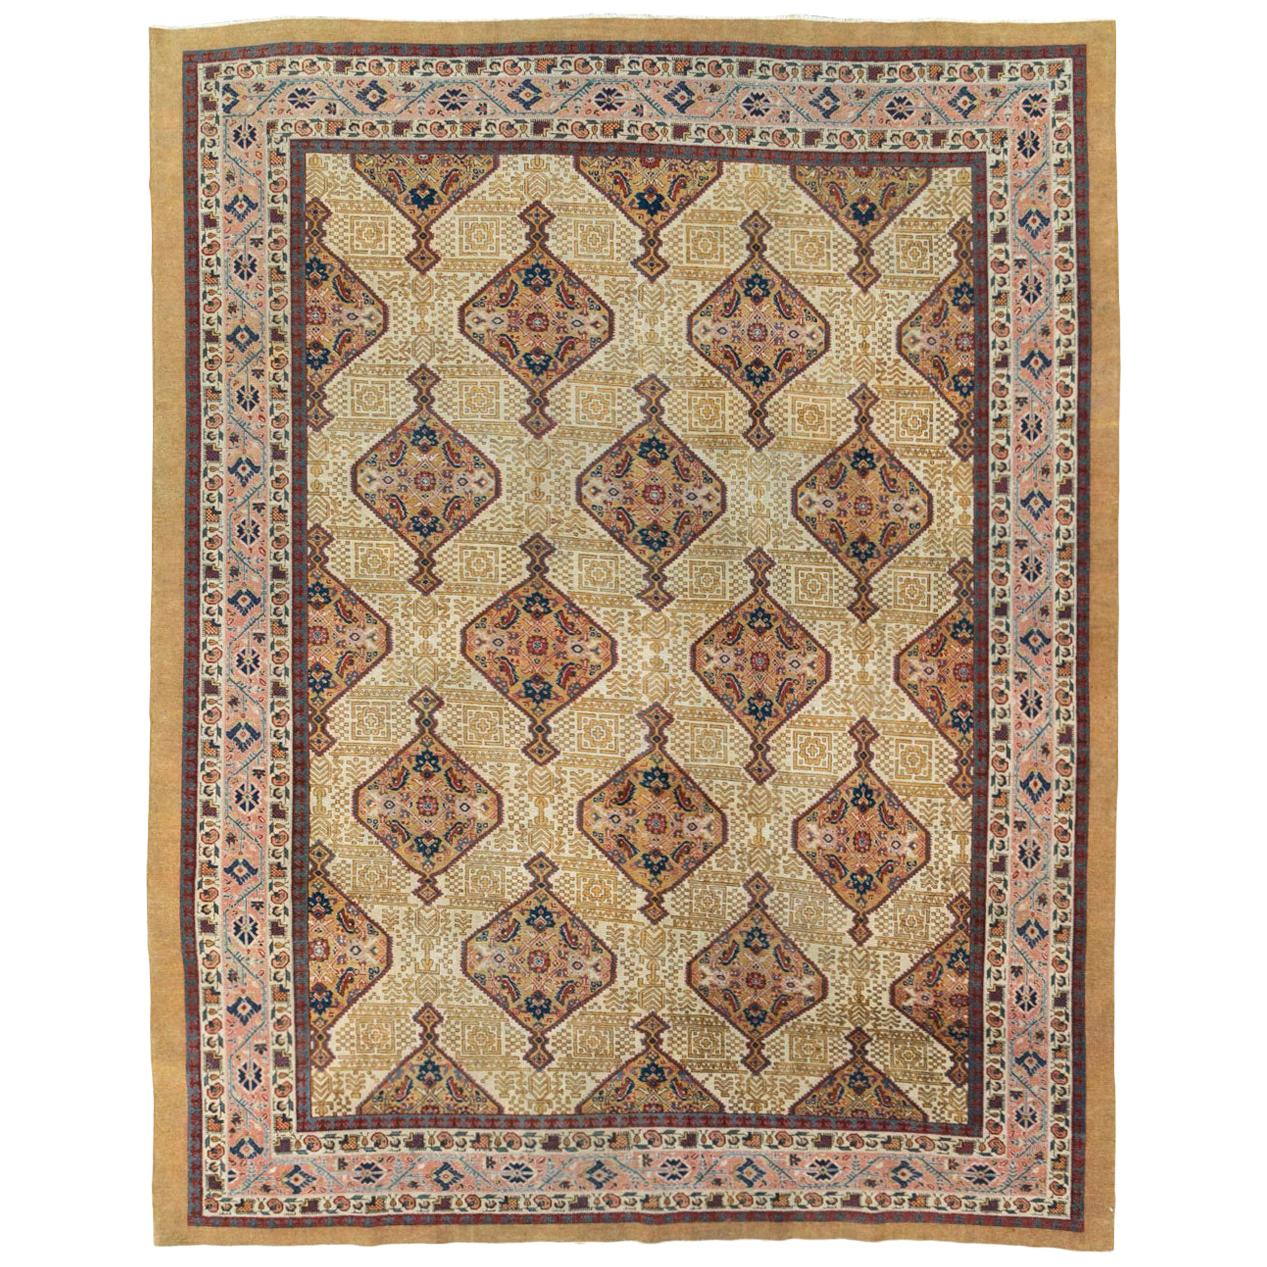 Early 20th Century Handmade Persian Tabriz Room Size Carpet For Sale